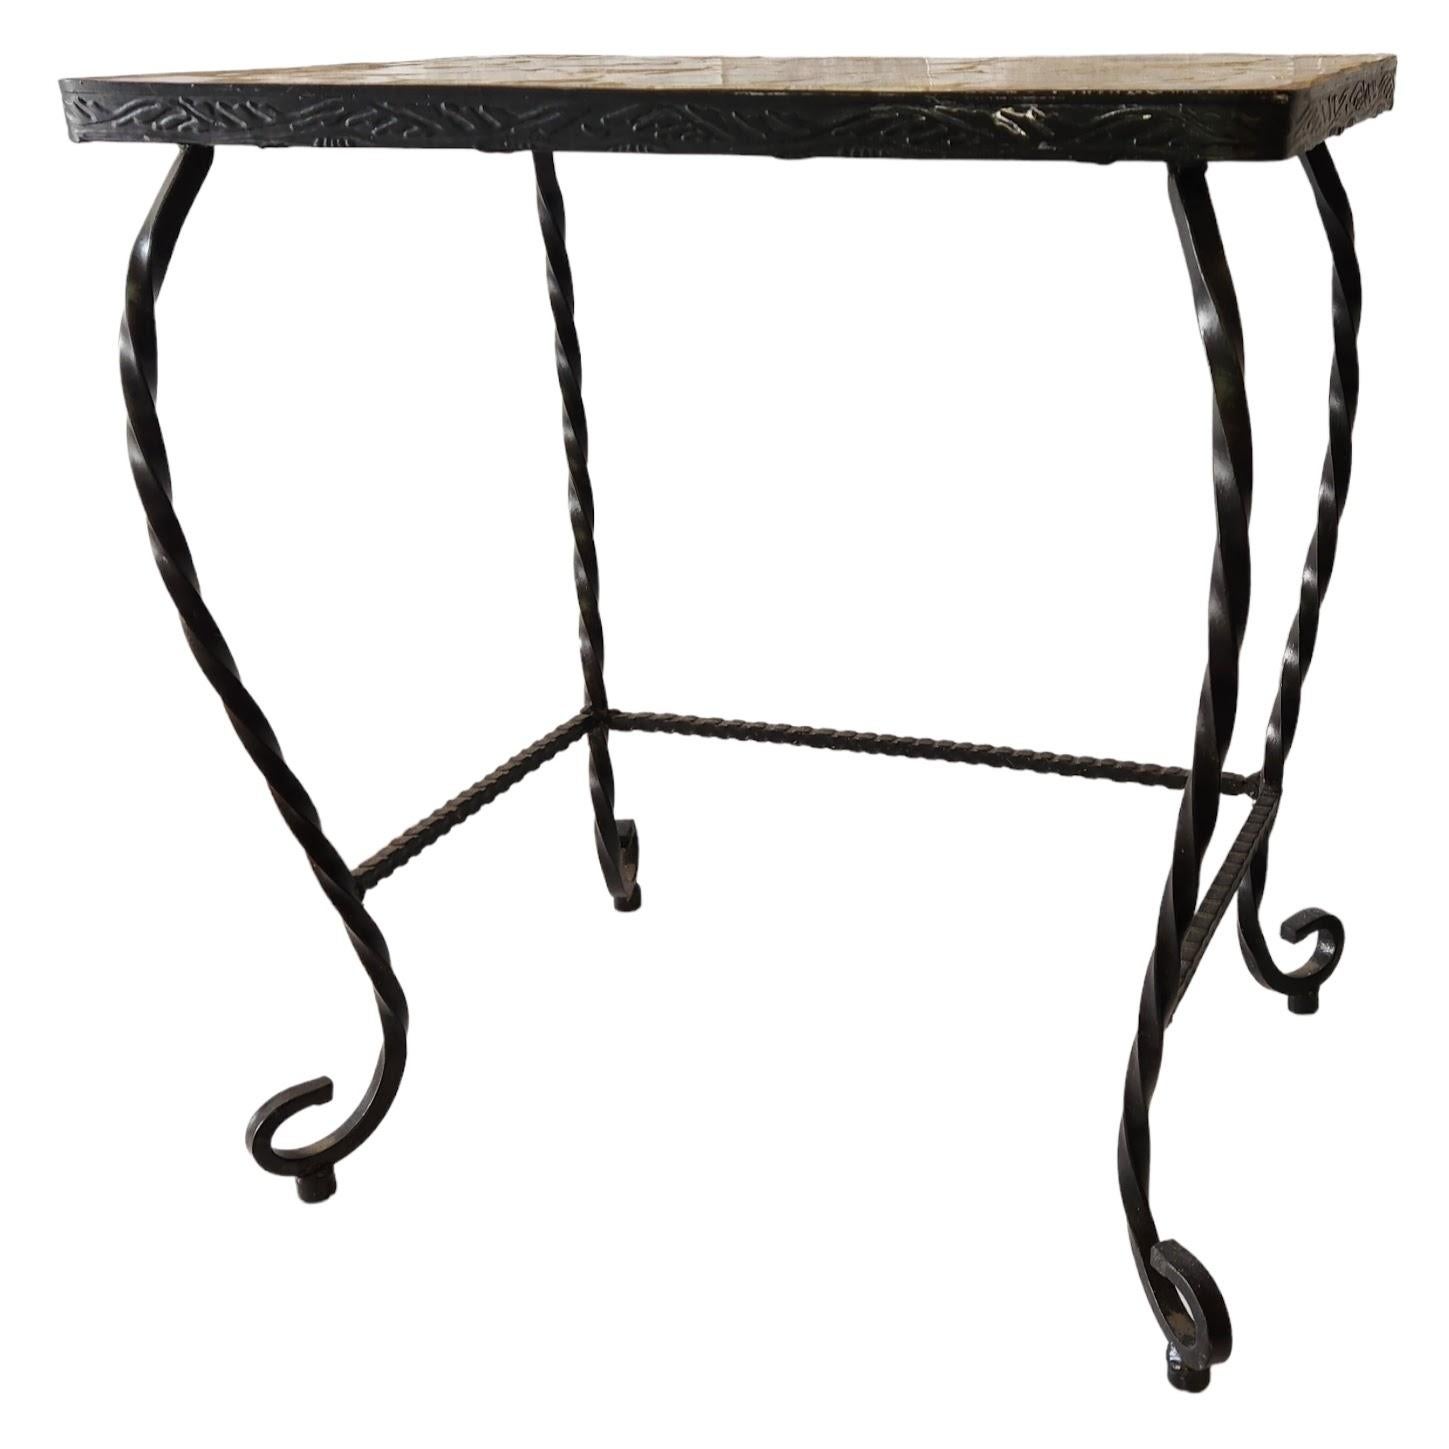 Pair of Twisted Wrought Iron Ceramic Mosaic Side Tables, Italy, 1960 For Sale 3